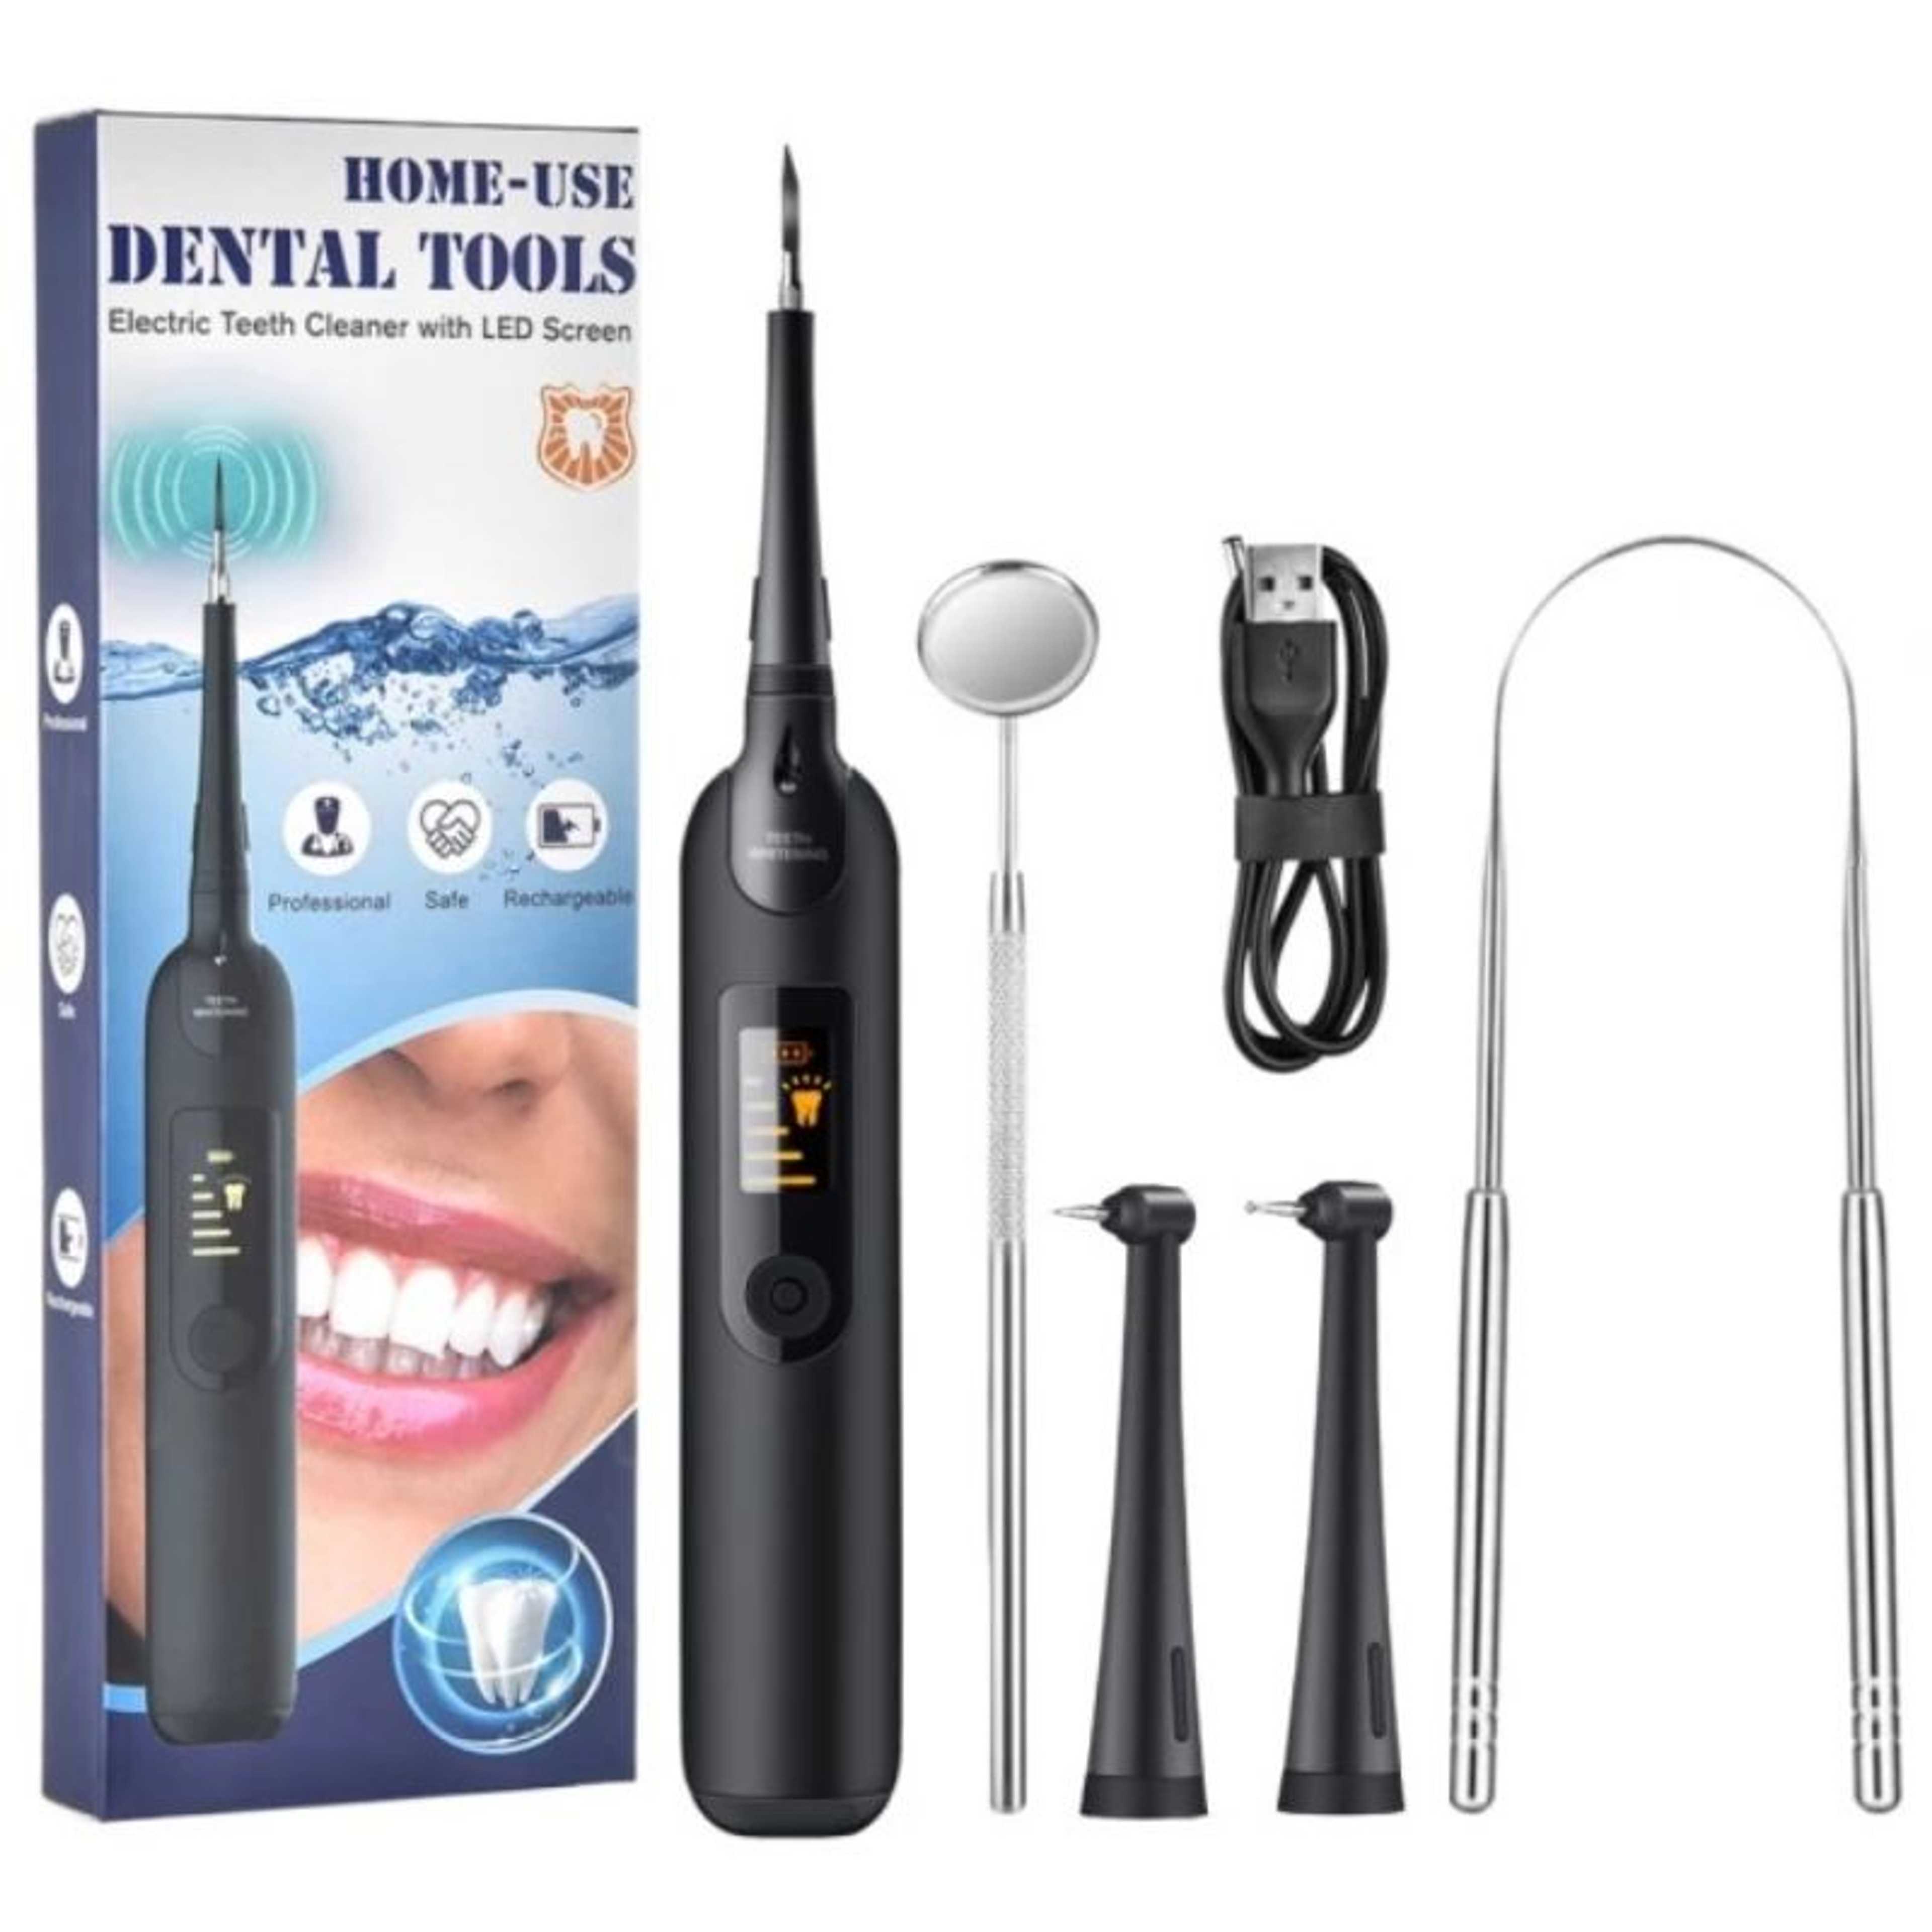 Electric Teeth Cleaner With Led Screen, Electric Dental Calculation and Dirt Scaler, Electric Dental Calculus Remover, Ultrasonic Tooth Cleaner Portable Sonic Tartar Plaque Stain Remover For Teeth Cleaning